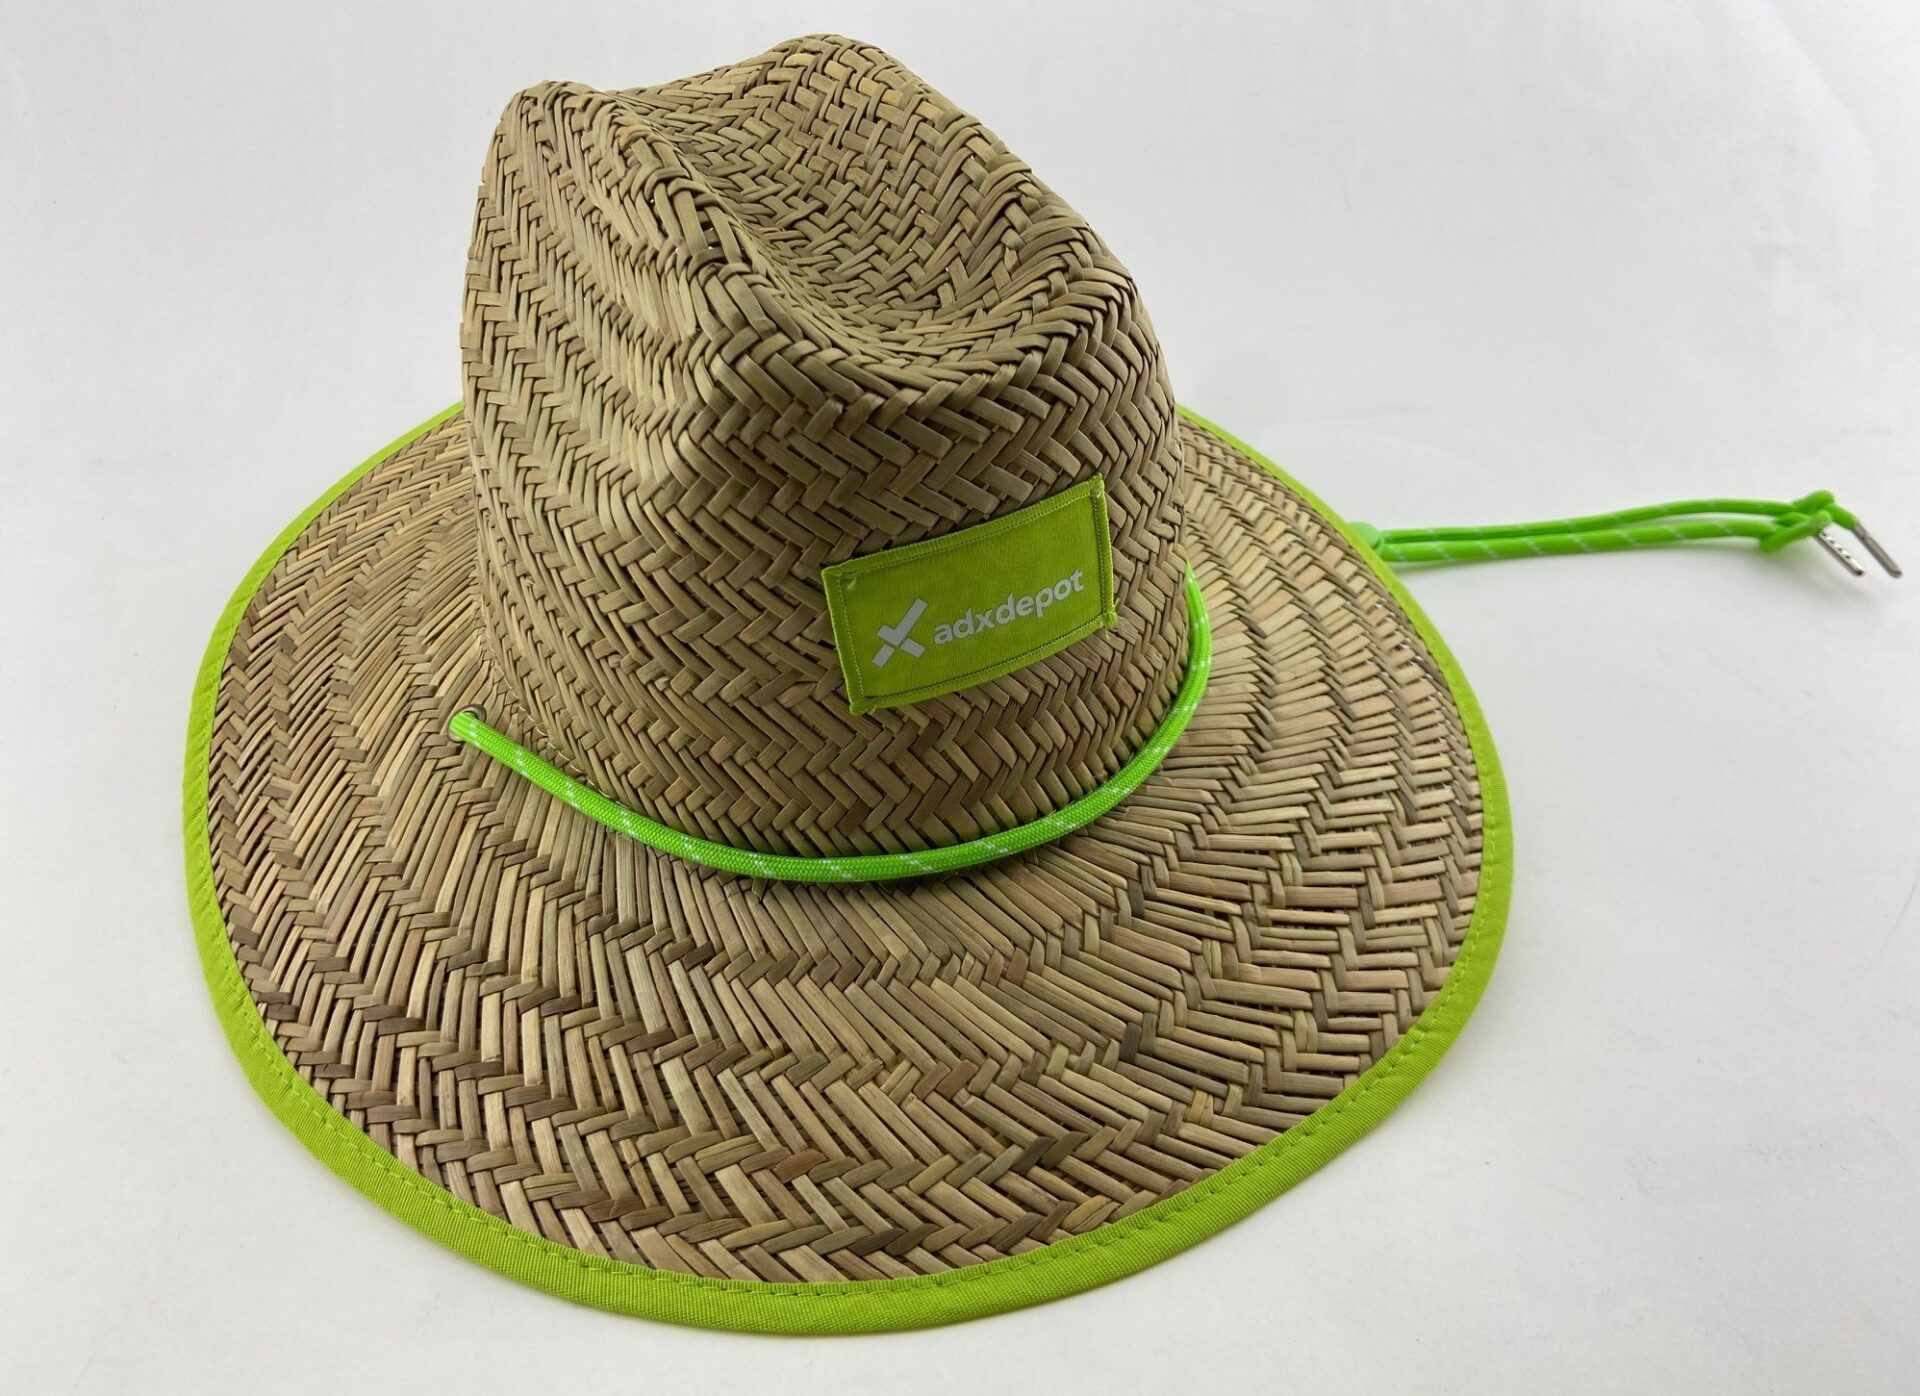 Classic wide brim straw hat promotional product.